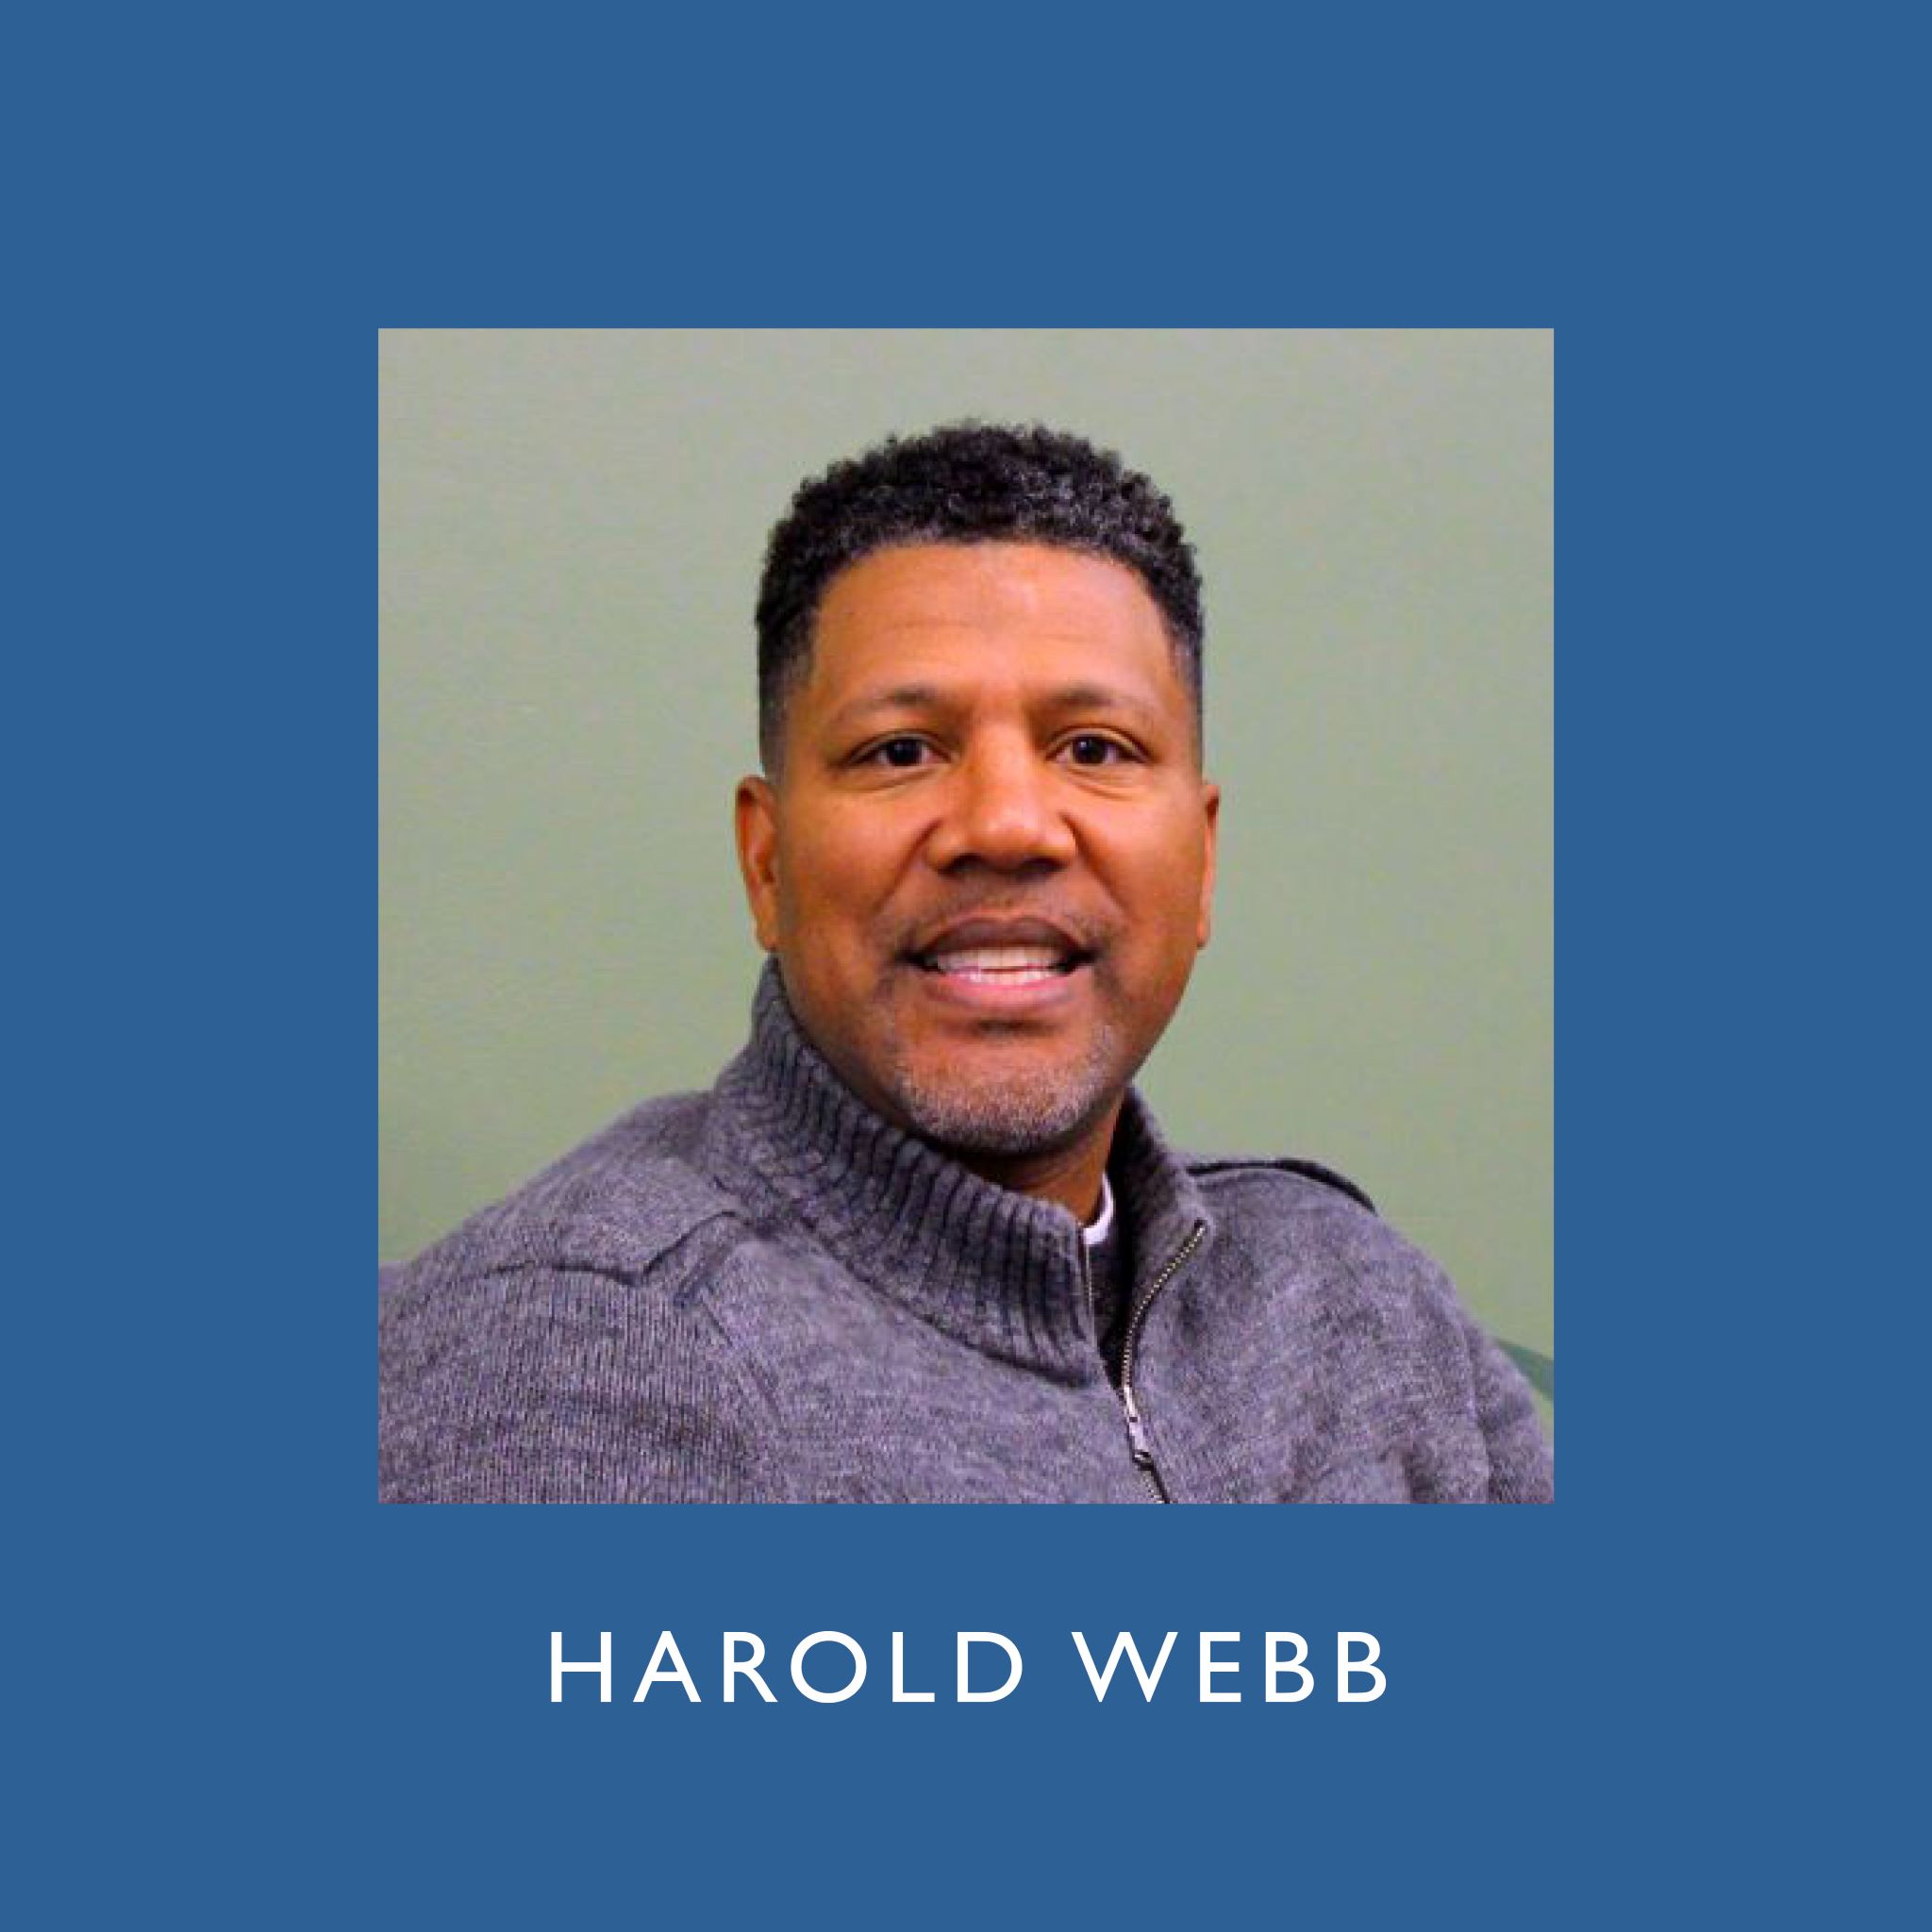 Harold Webb: Overcoming Fear, Rejection, and Panic Attacks